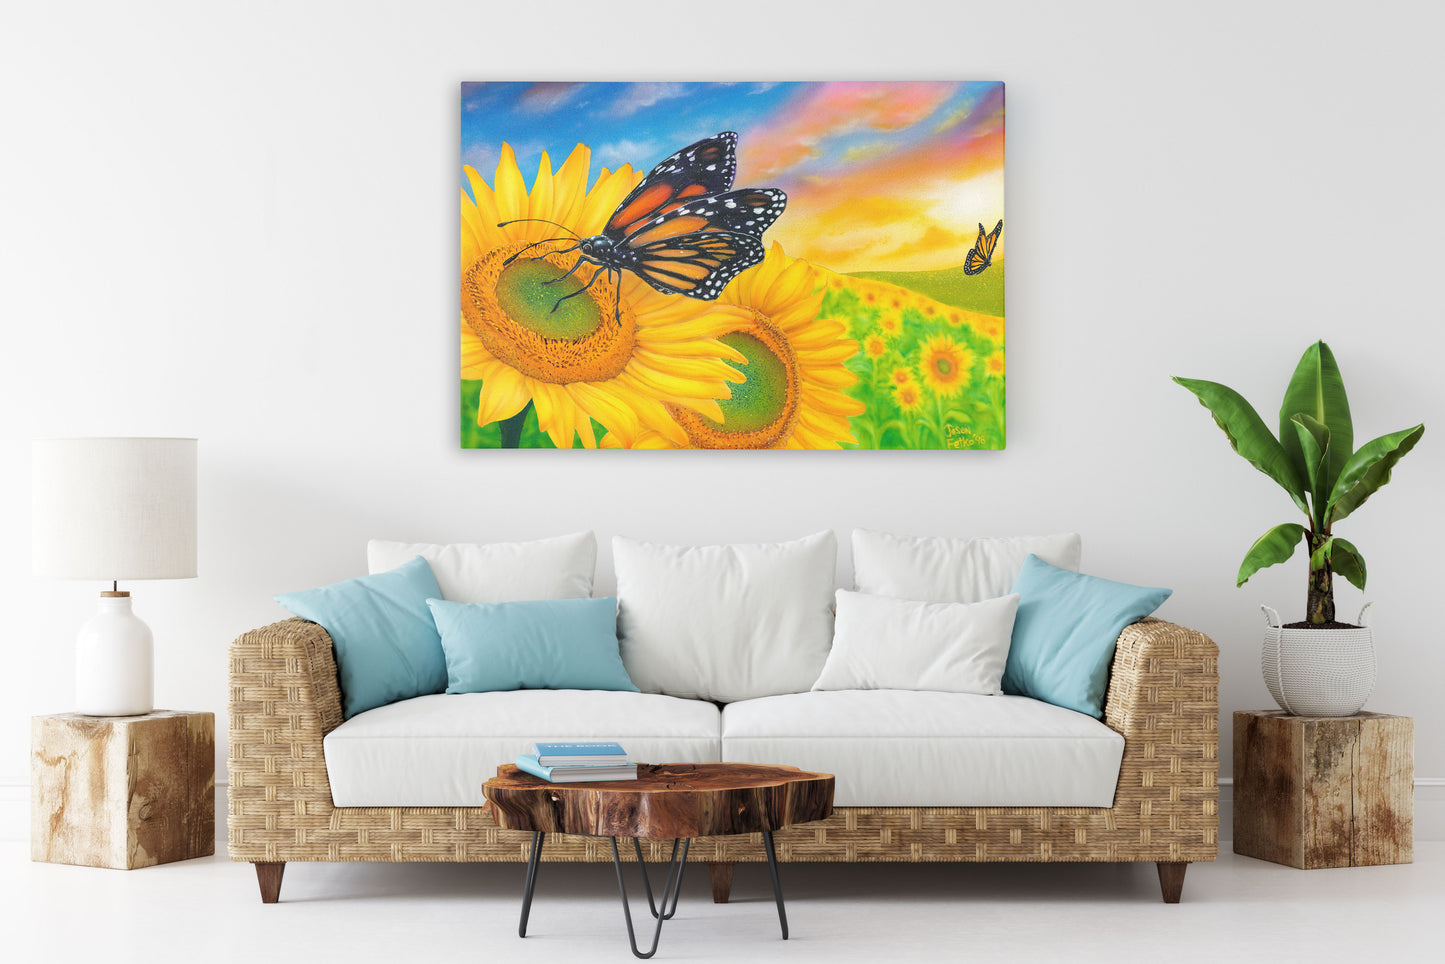 Sunflower Painting and Butterfly Art Canvas Print - "Sunflower Dreams" by Jason Fetko